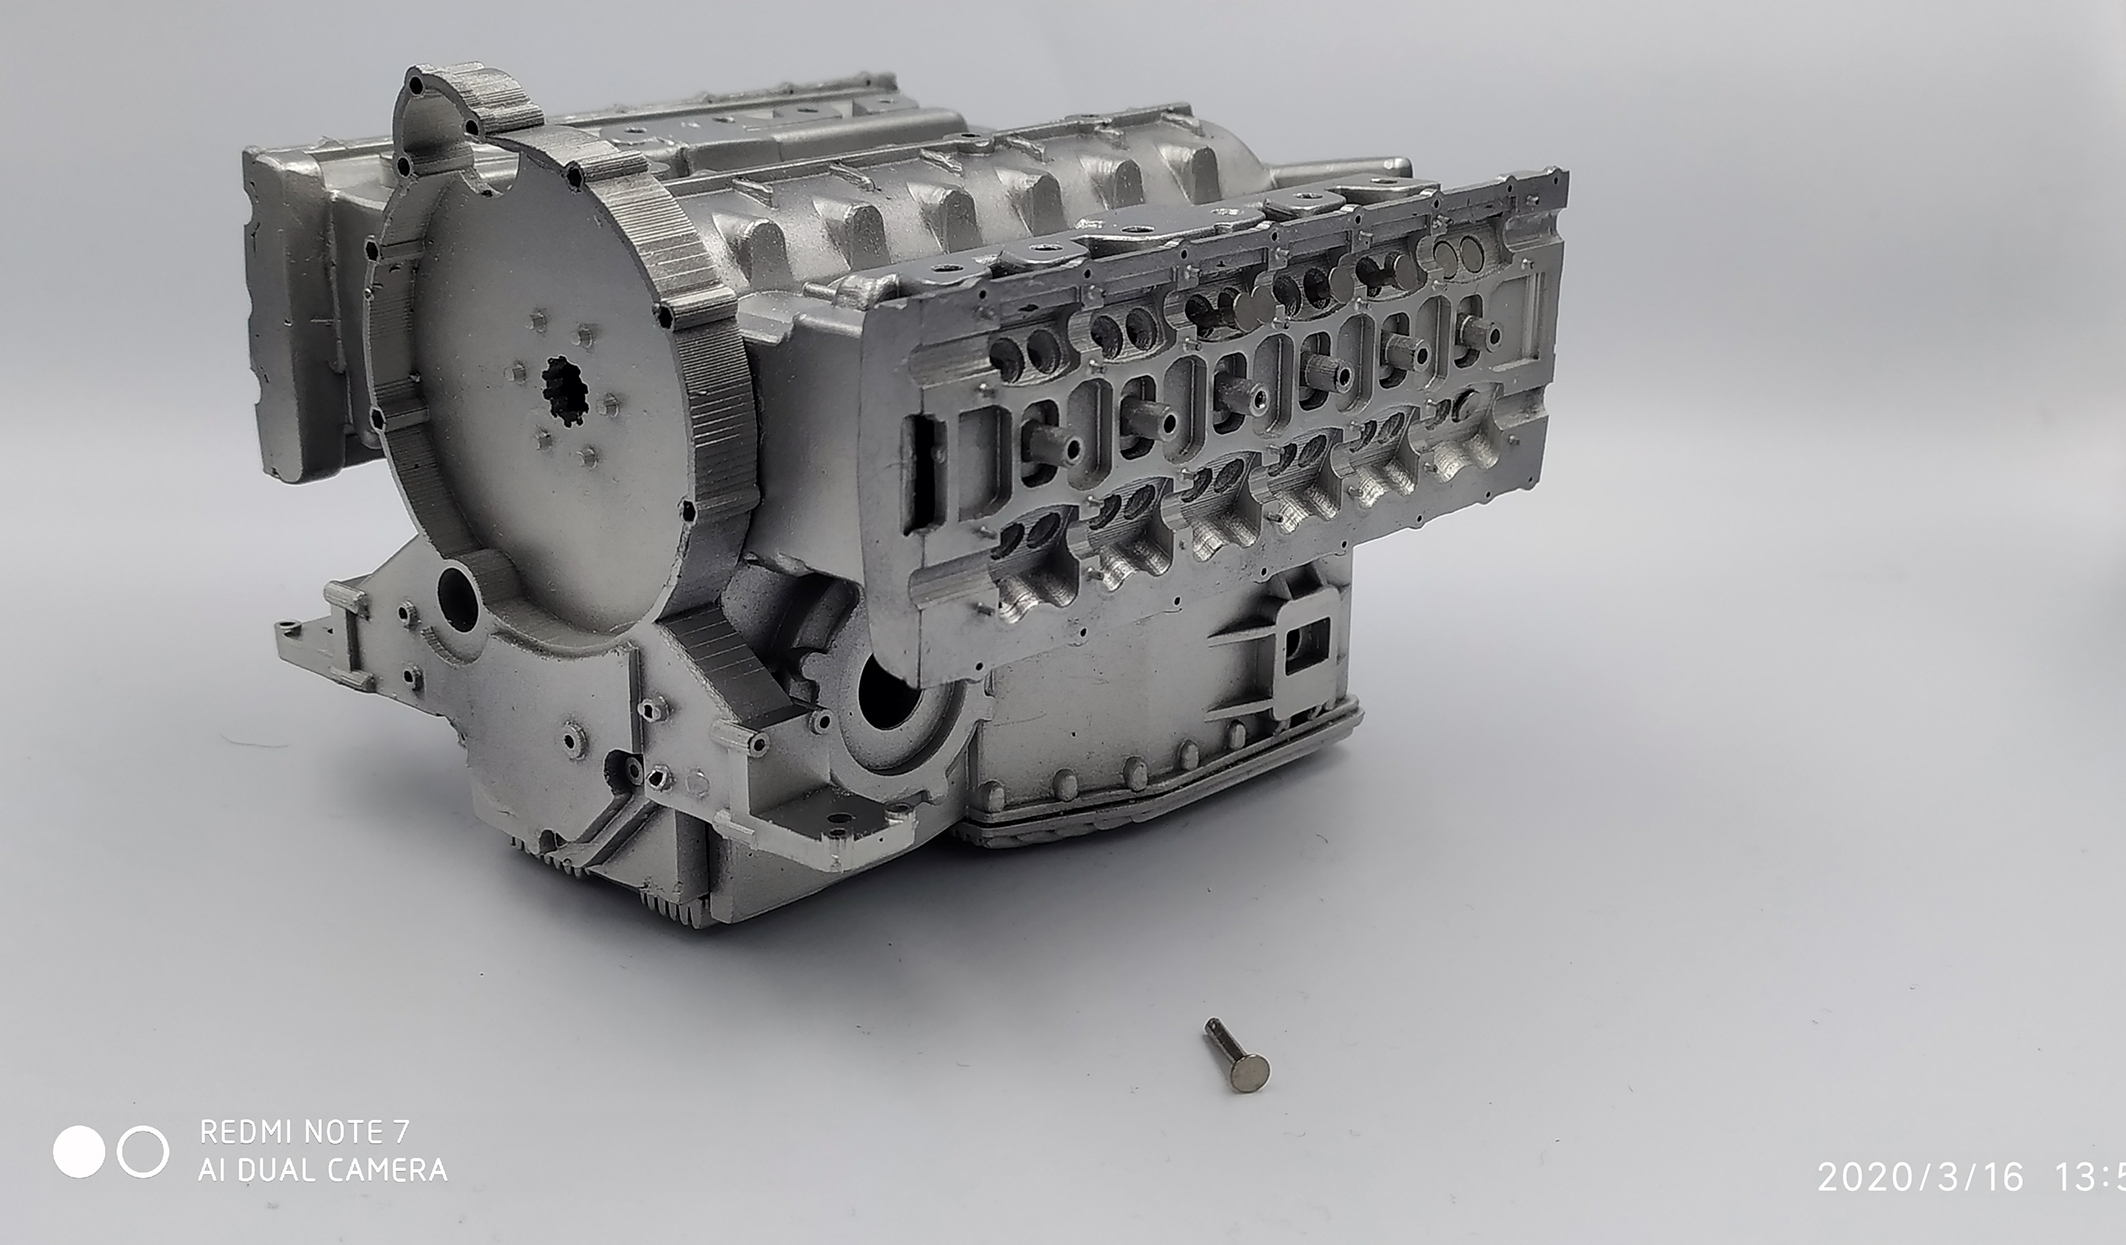 Exhaust Camshaft Complete with high detail parts (included in new transkit)